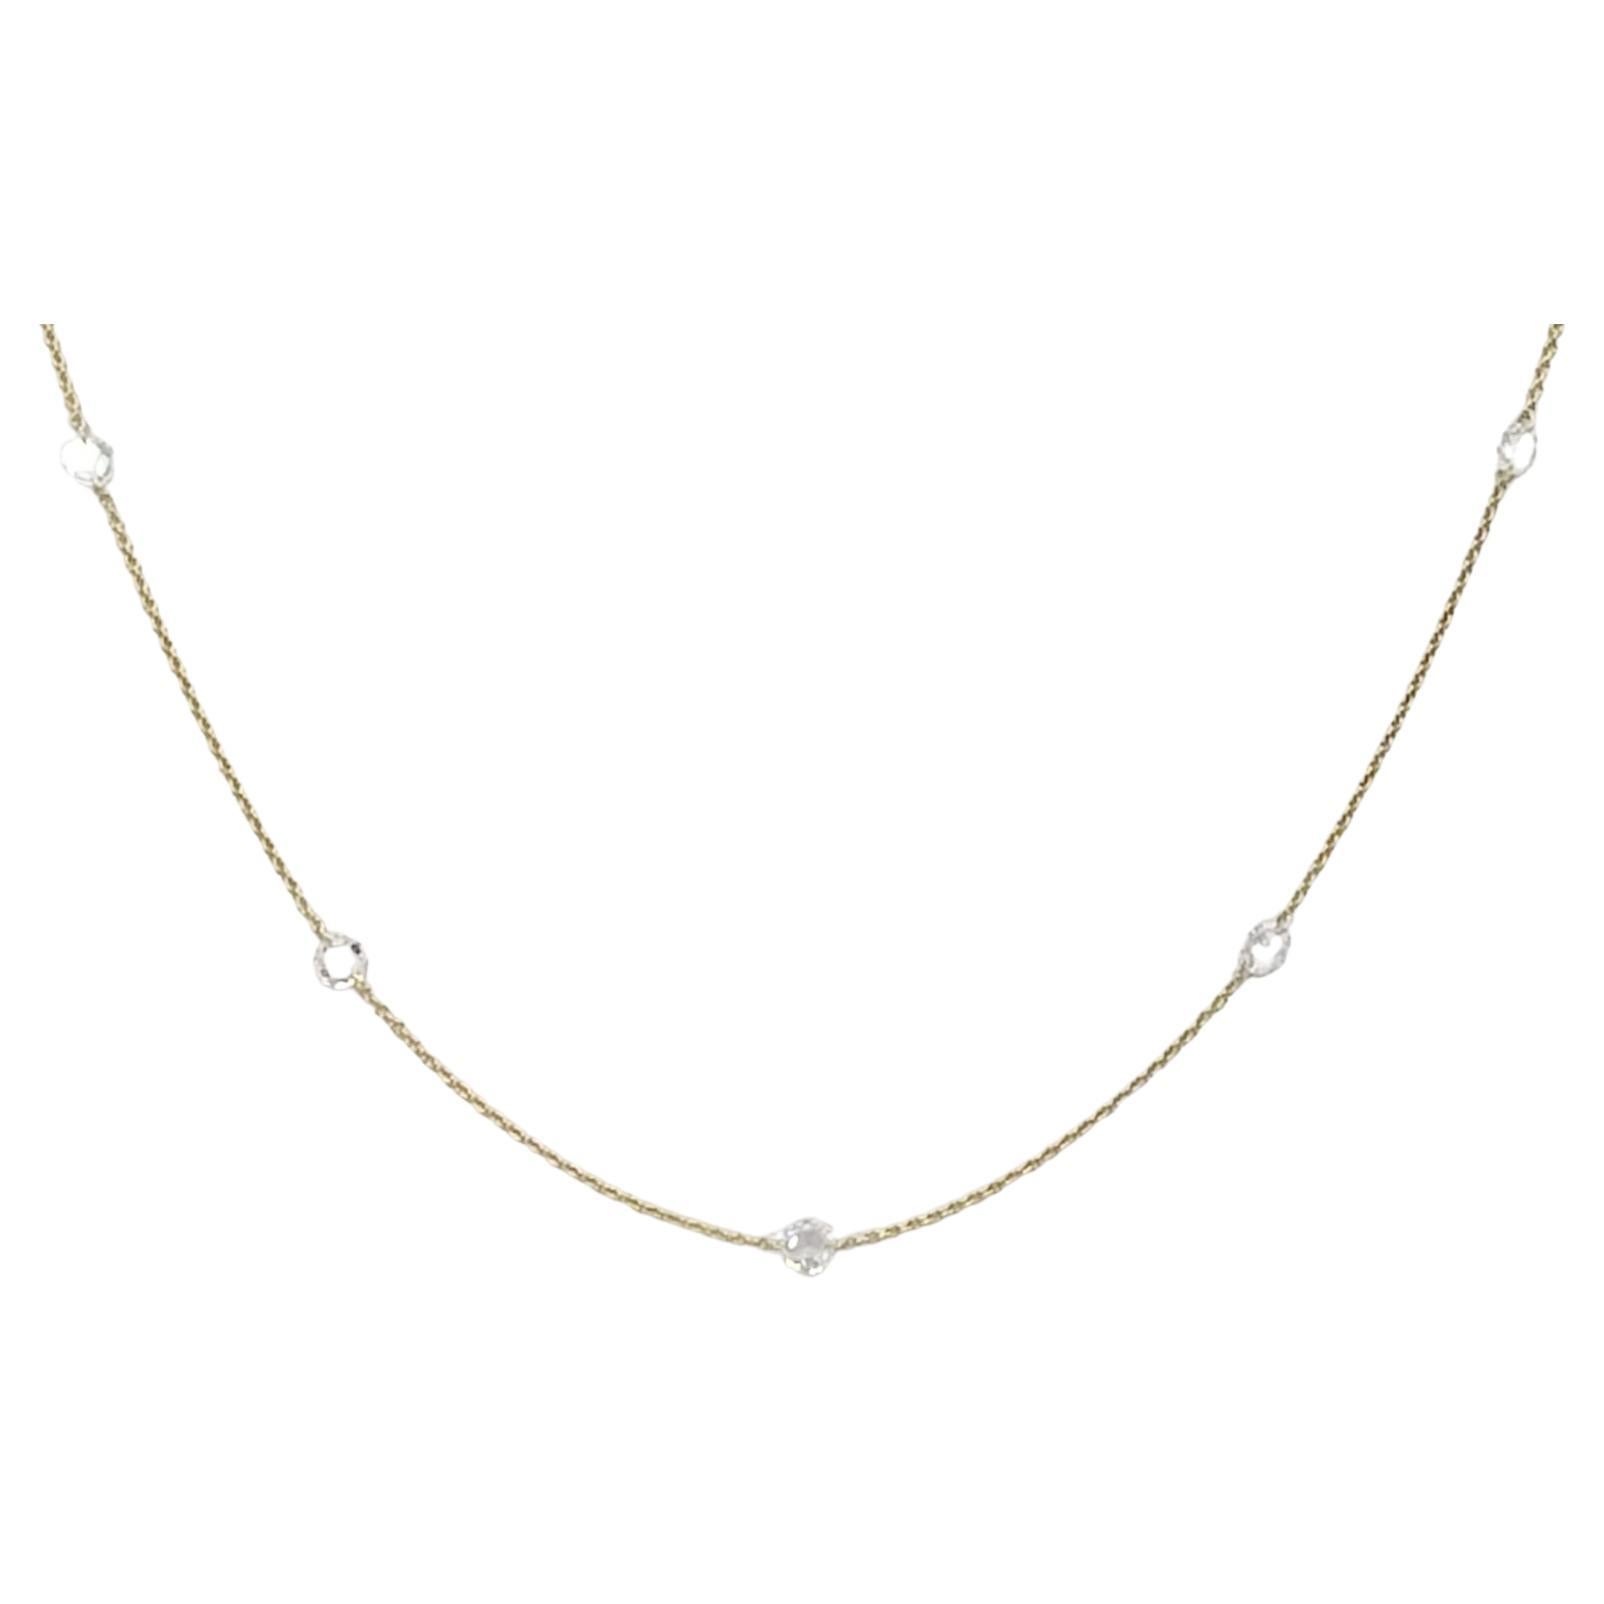 White Diamond Rose Cut Chain Necklace in 18K Yellow Gold